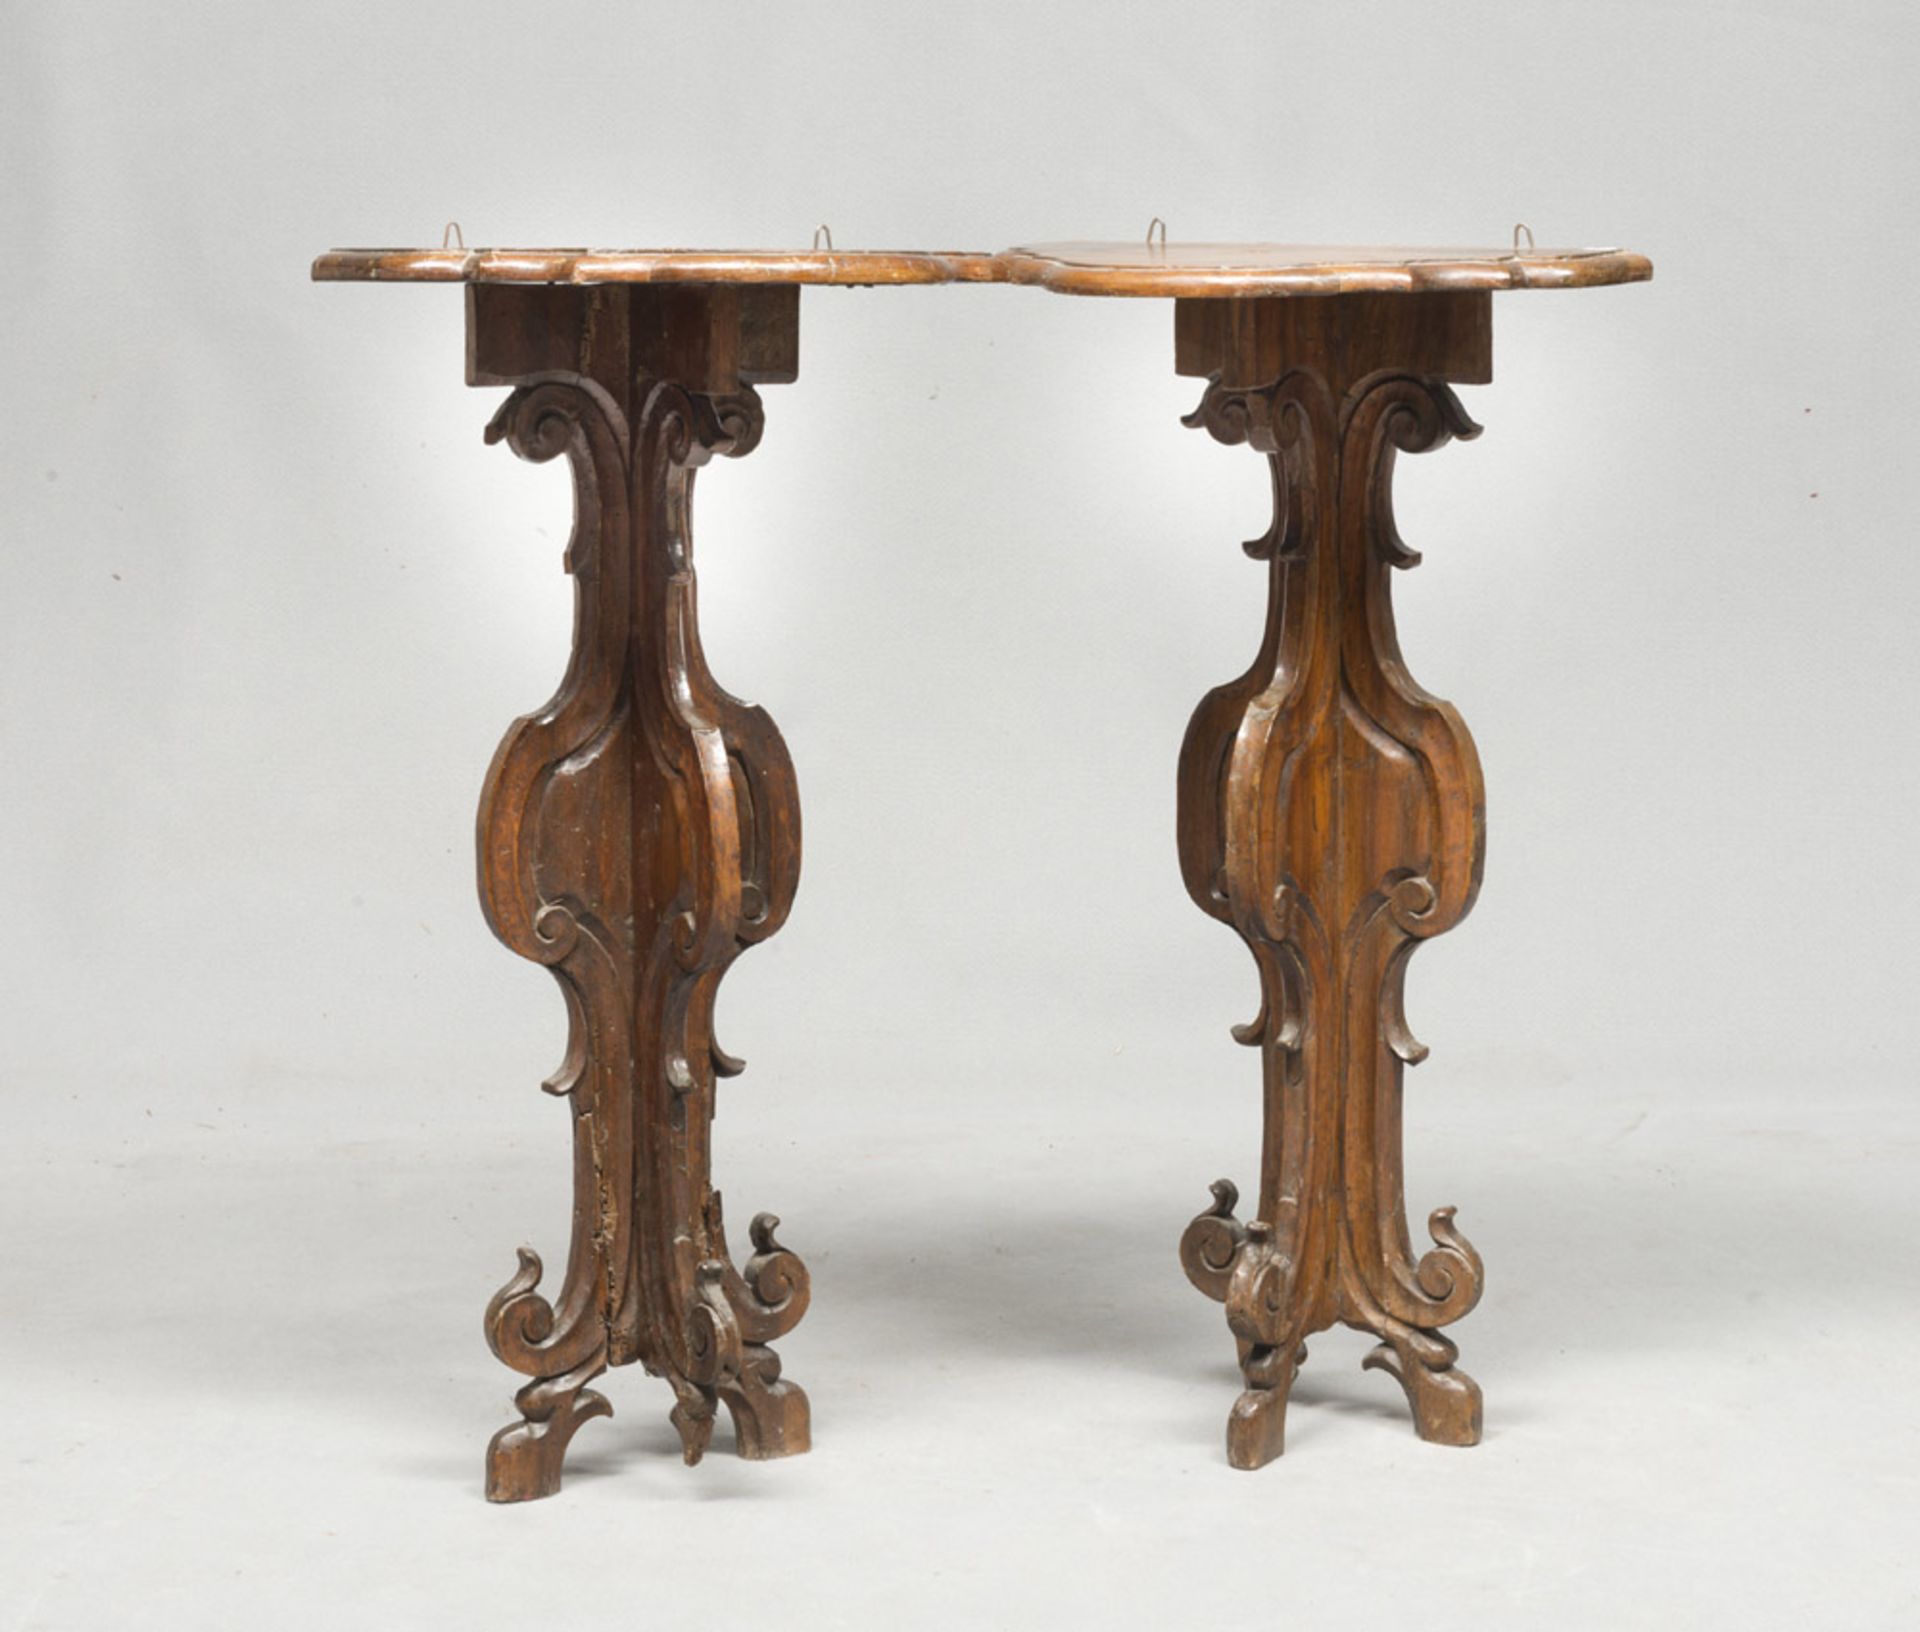 A PAIR OF SMALL WALNUT-TREE CONSOLES, ANCIENT ELEMENTS